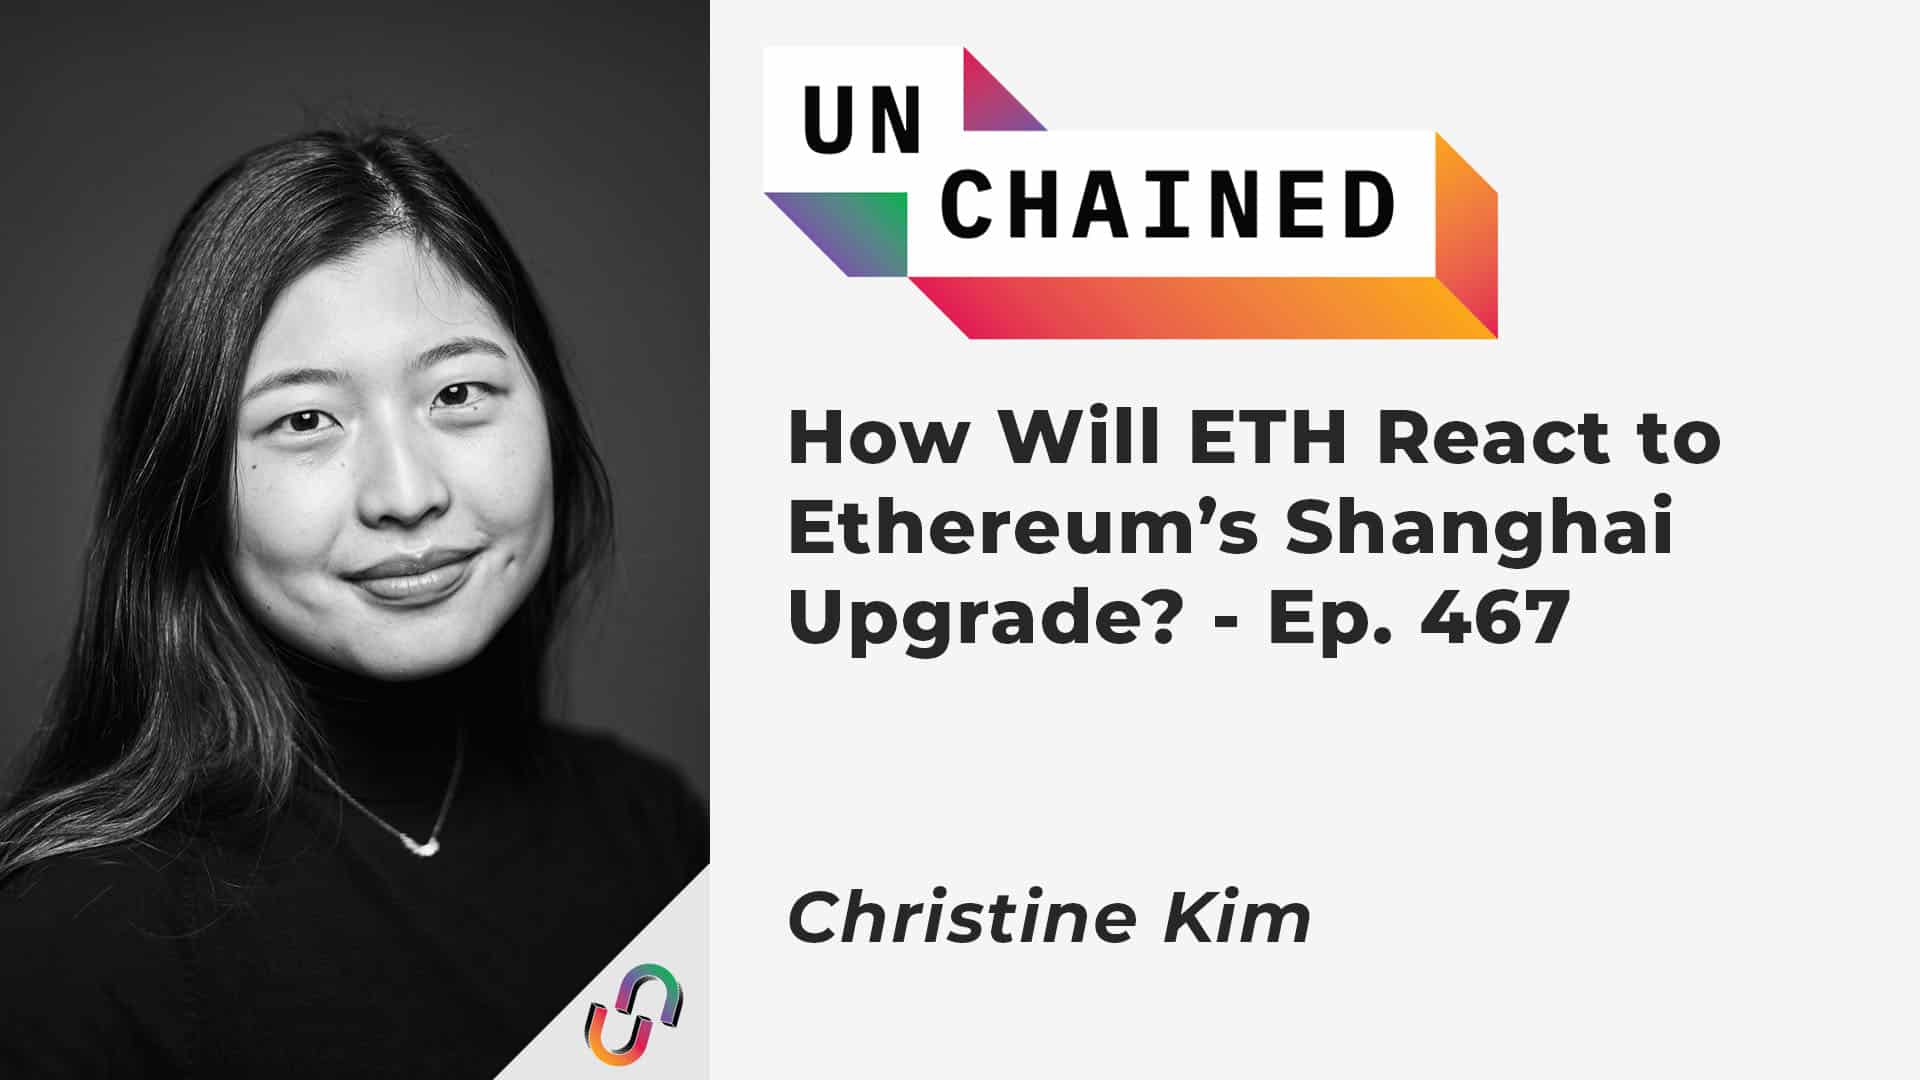 How Will ETH React to Ethereum’s Shanghai Upgrade? - Ep. 467